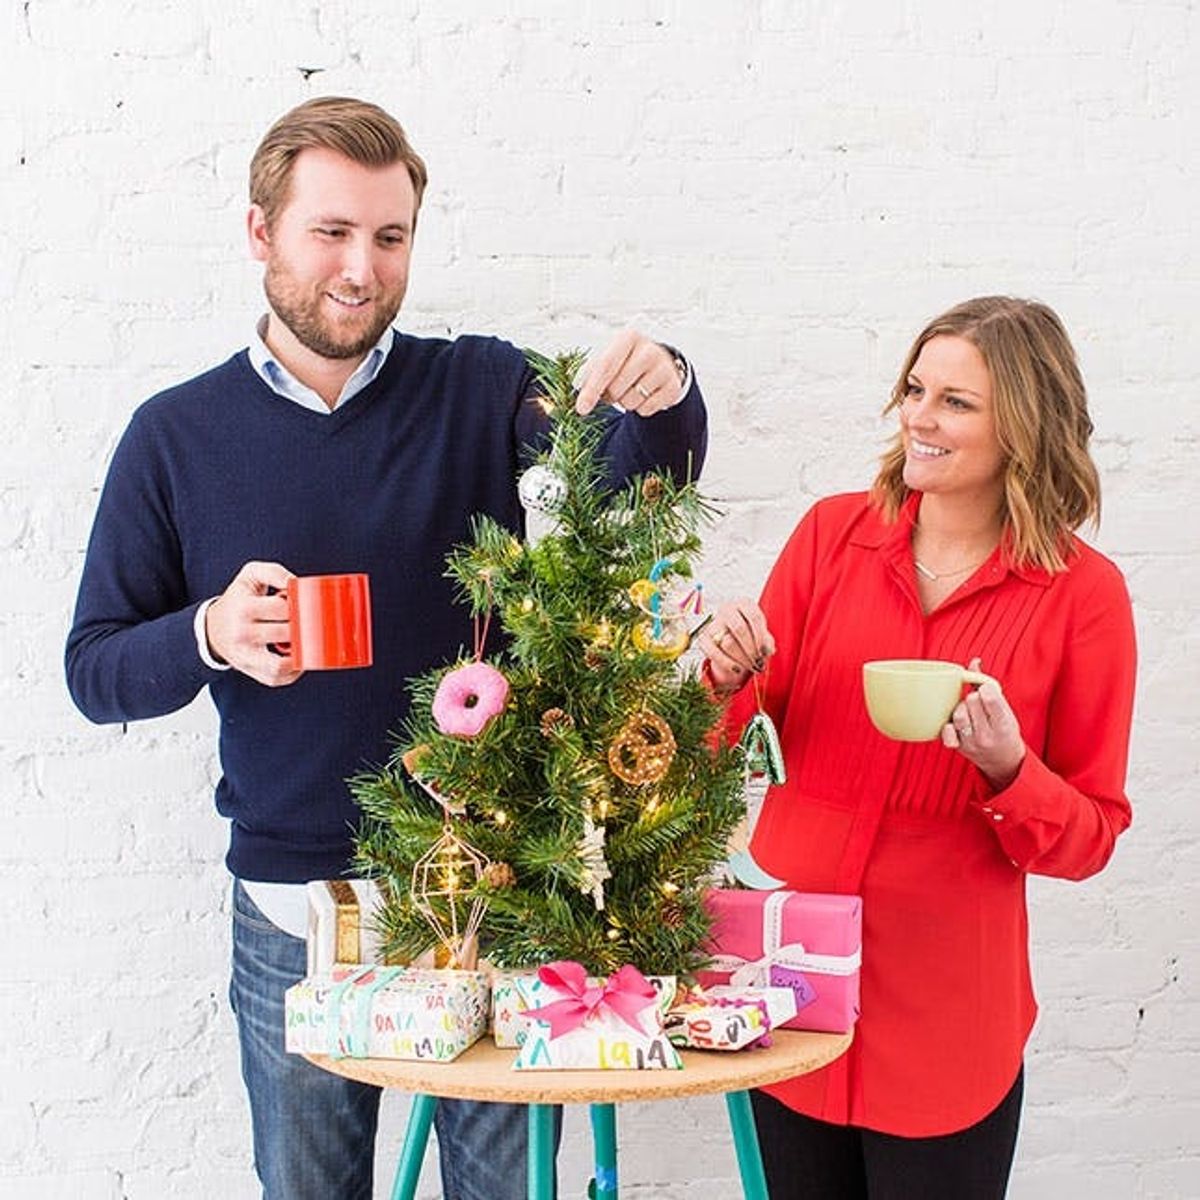 10 Ways to Create New Holiday Traditions as a Couple